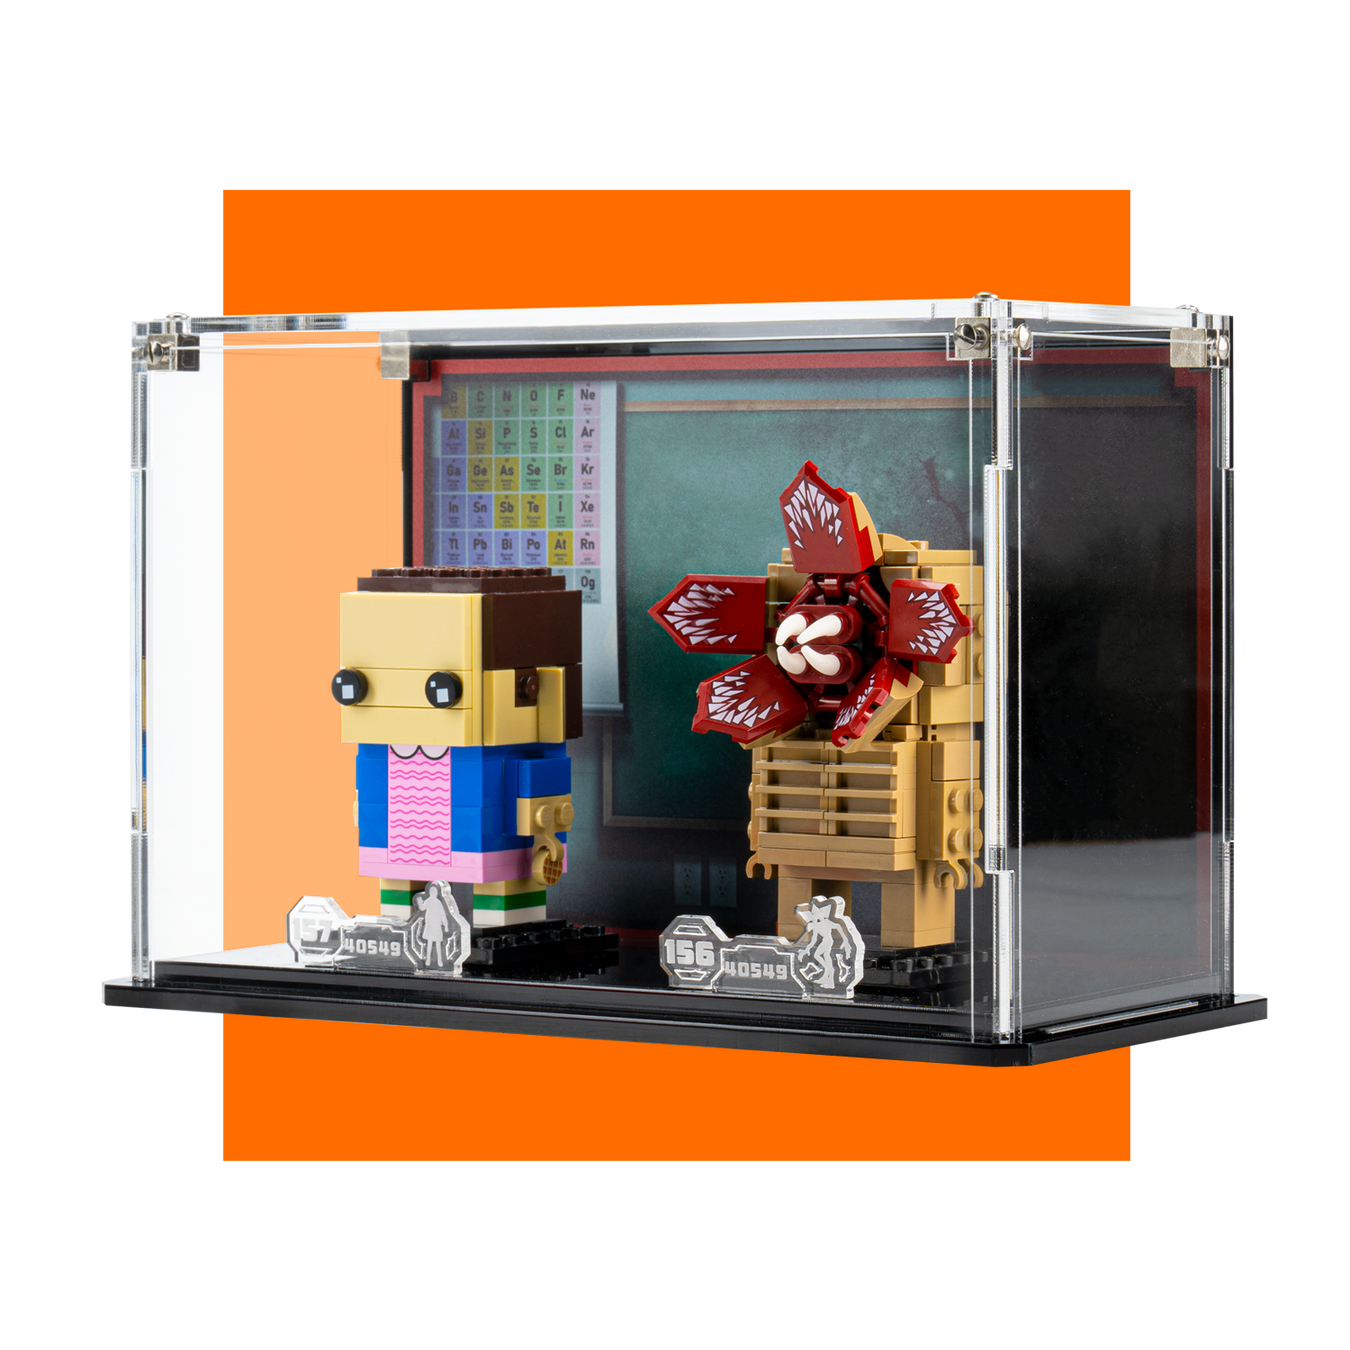 Display cases and solutions for LEGO® Stranger Things